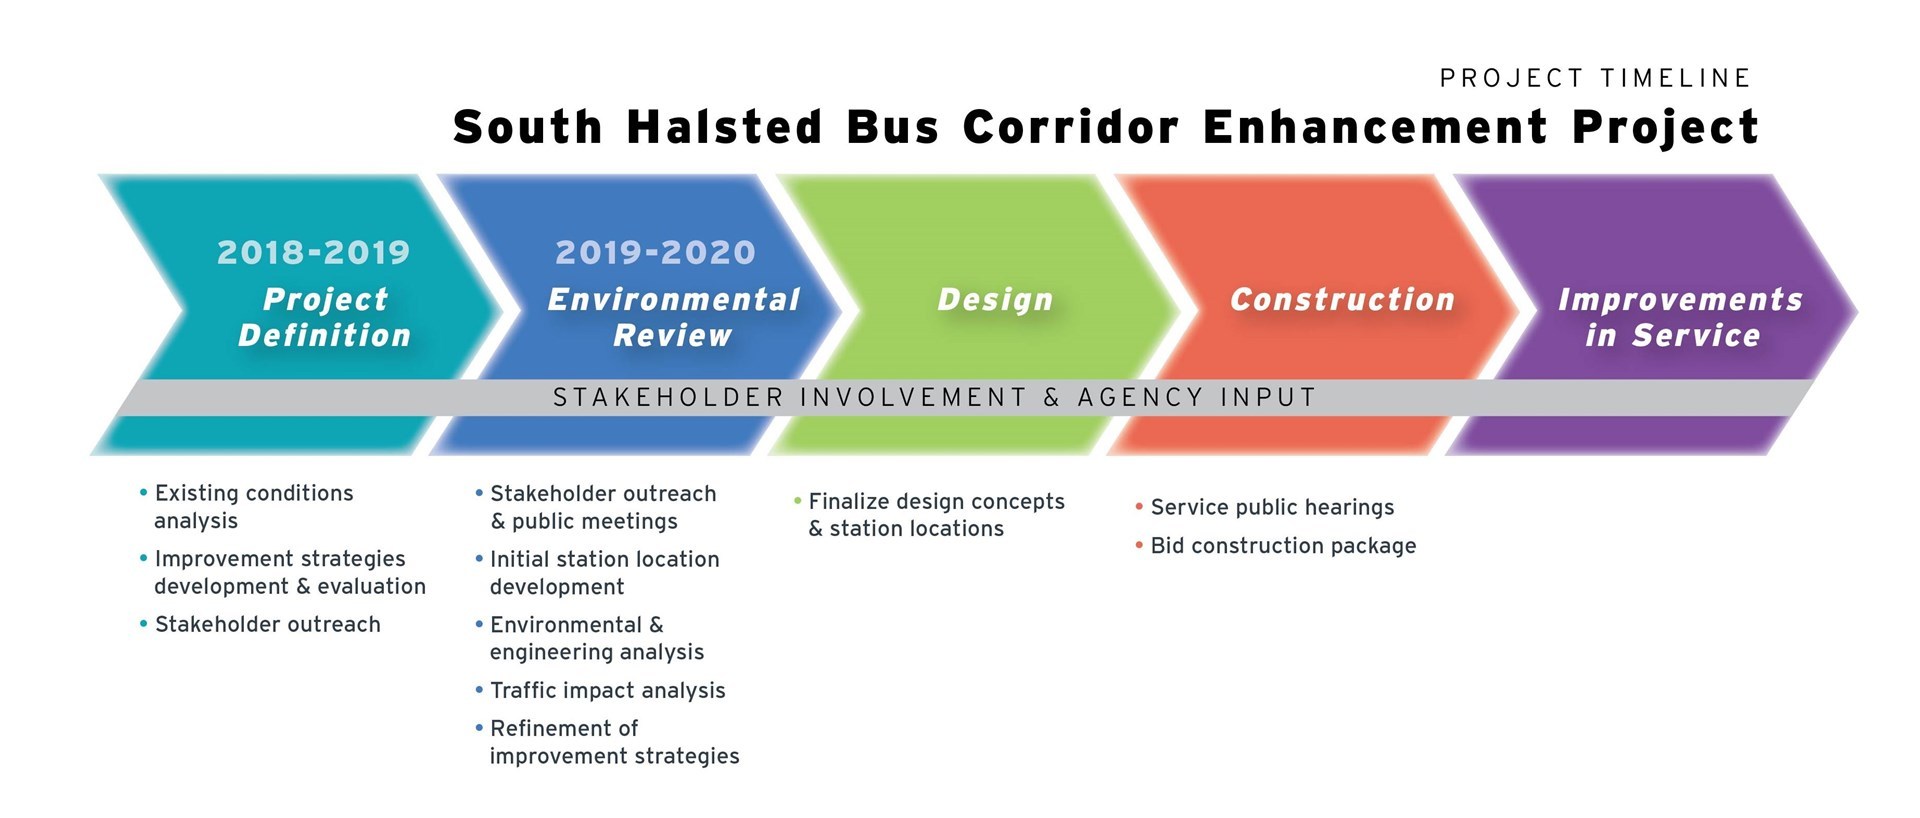 South Halsted Bus Corridor Project Timeline